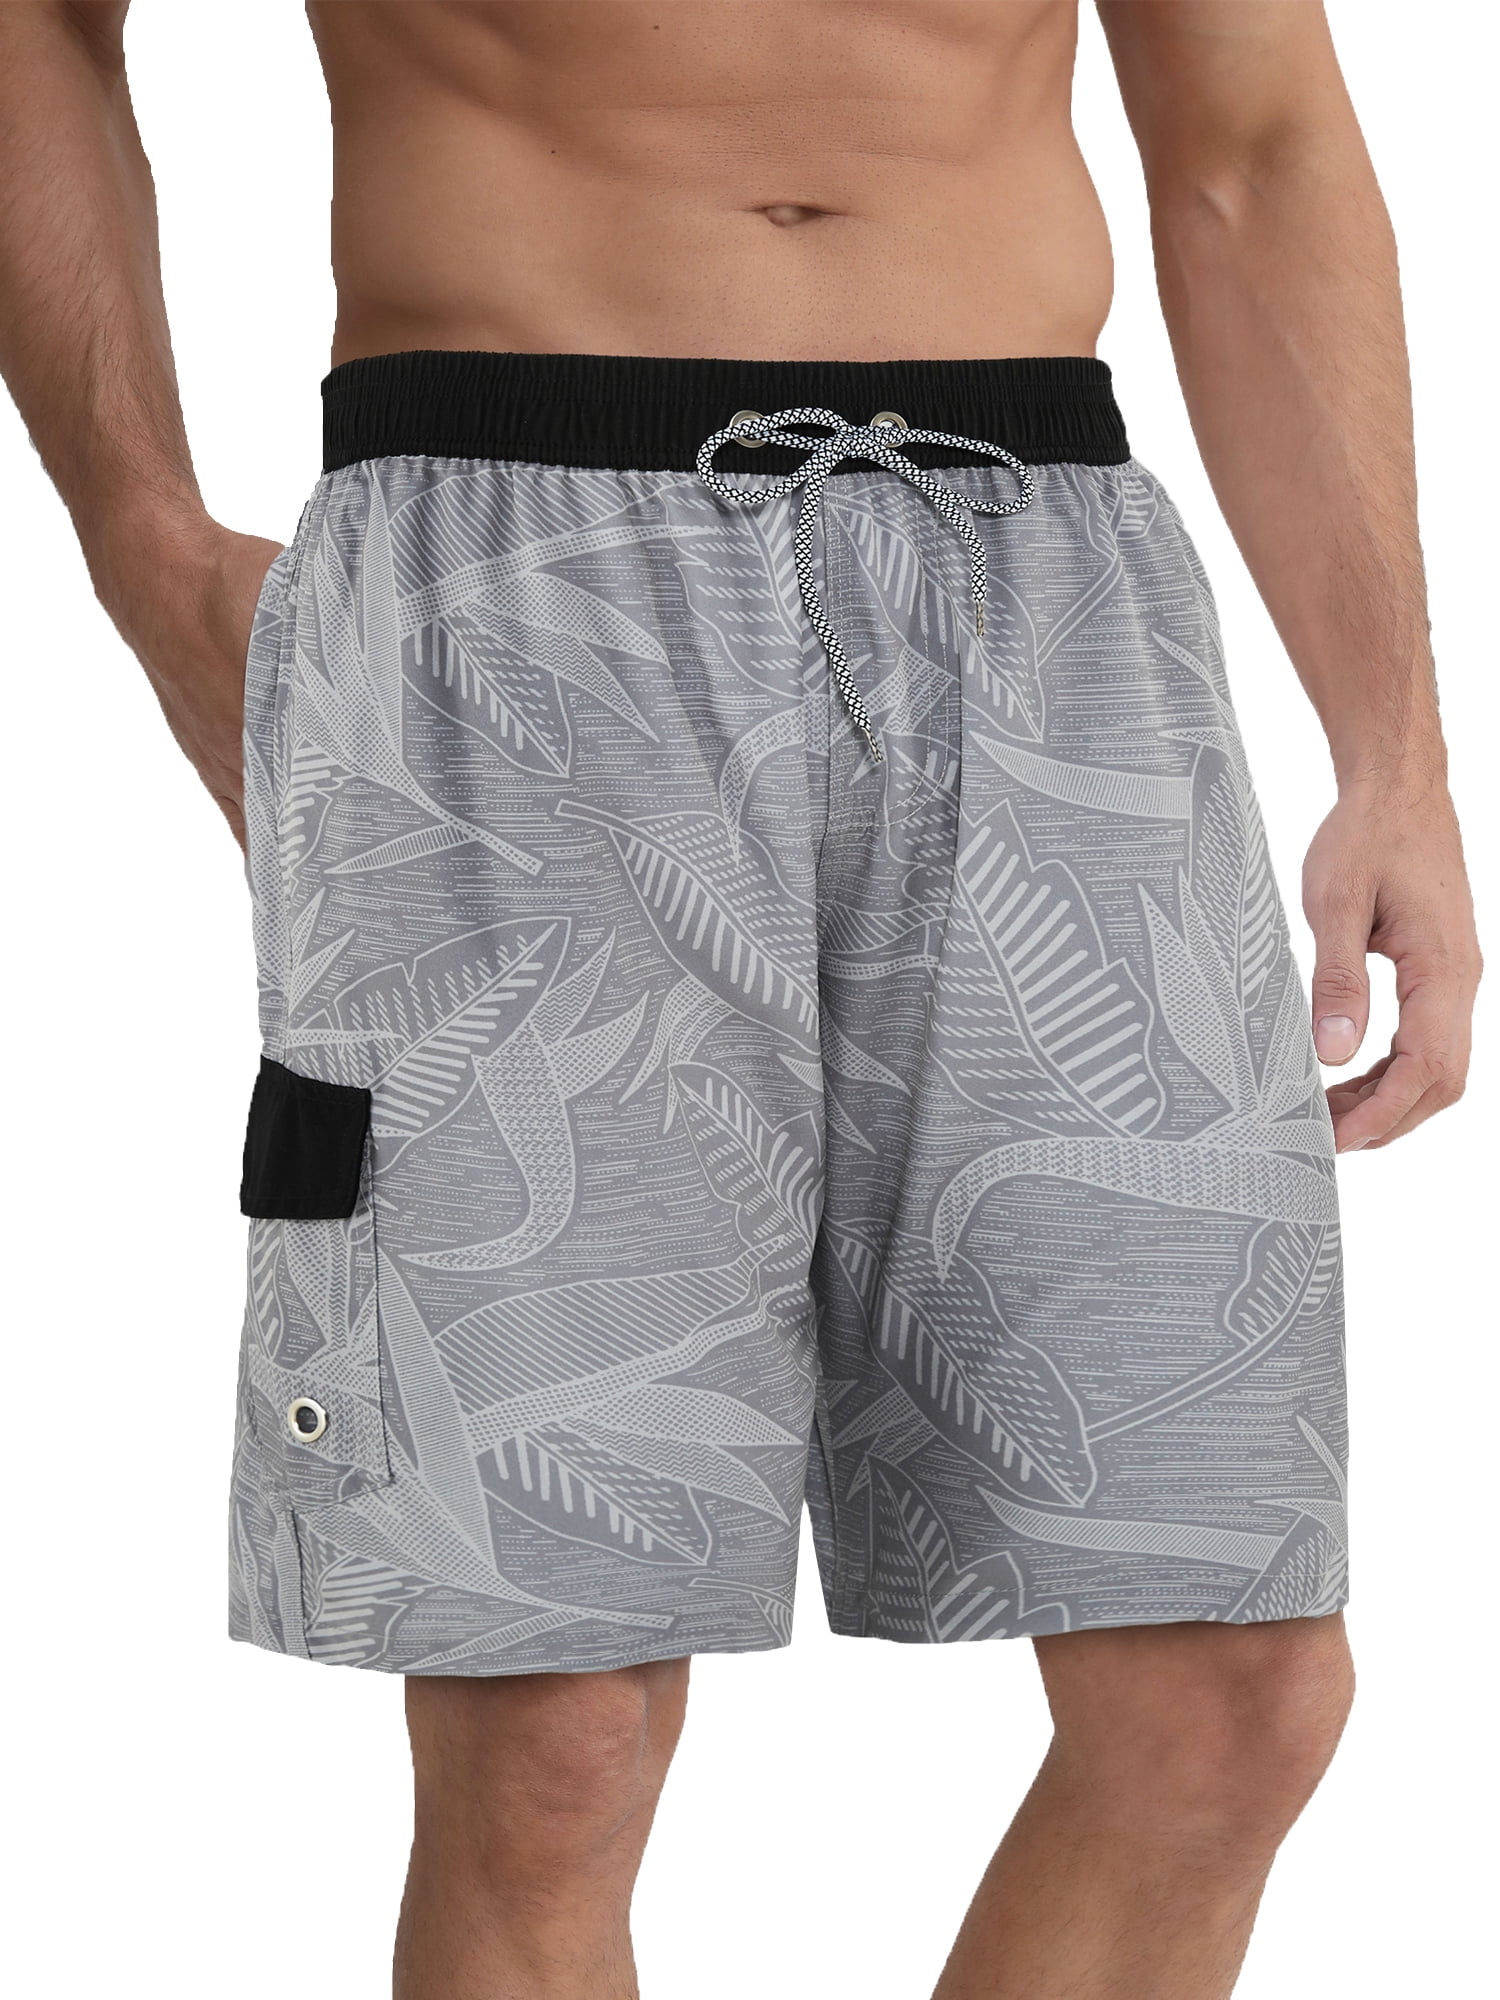 Black Panther Mens Swim Trunks Quick Dry Board Shorts with Mesh Lining ...